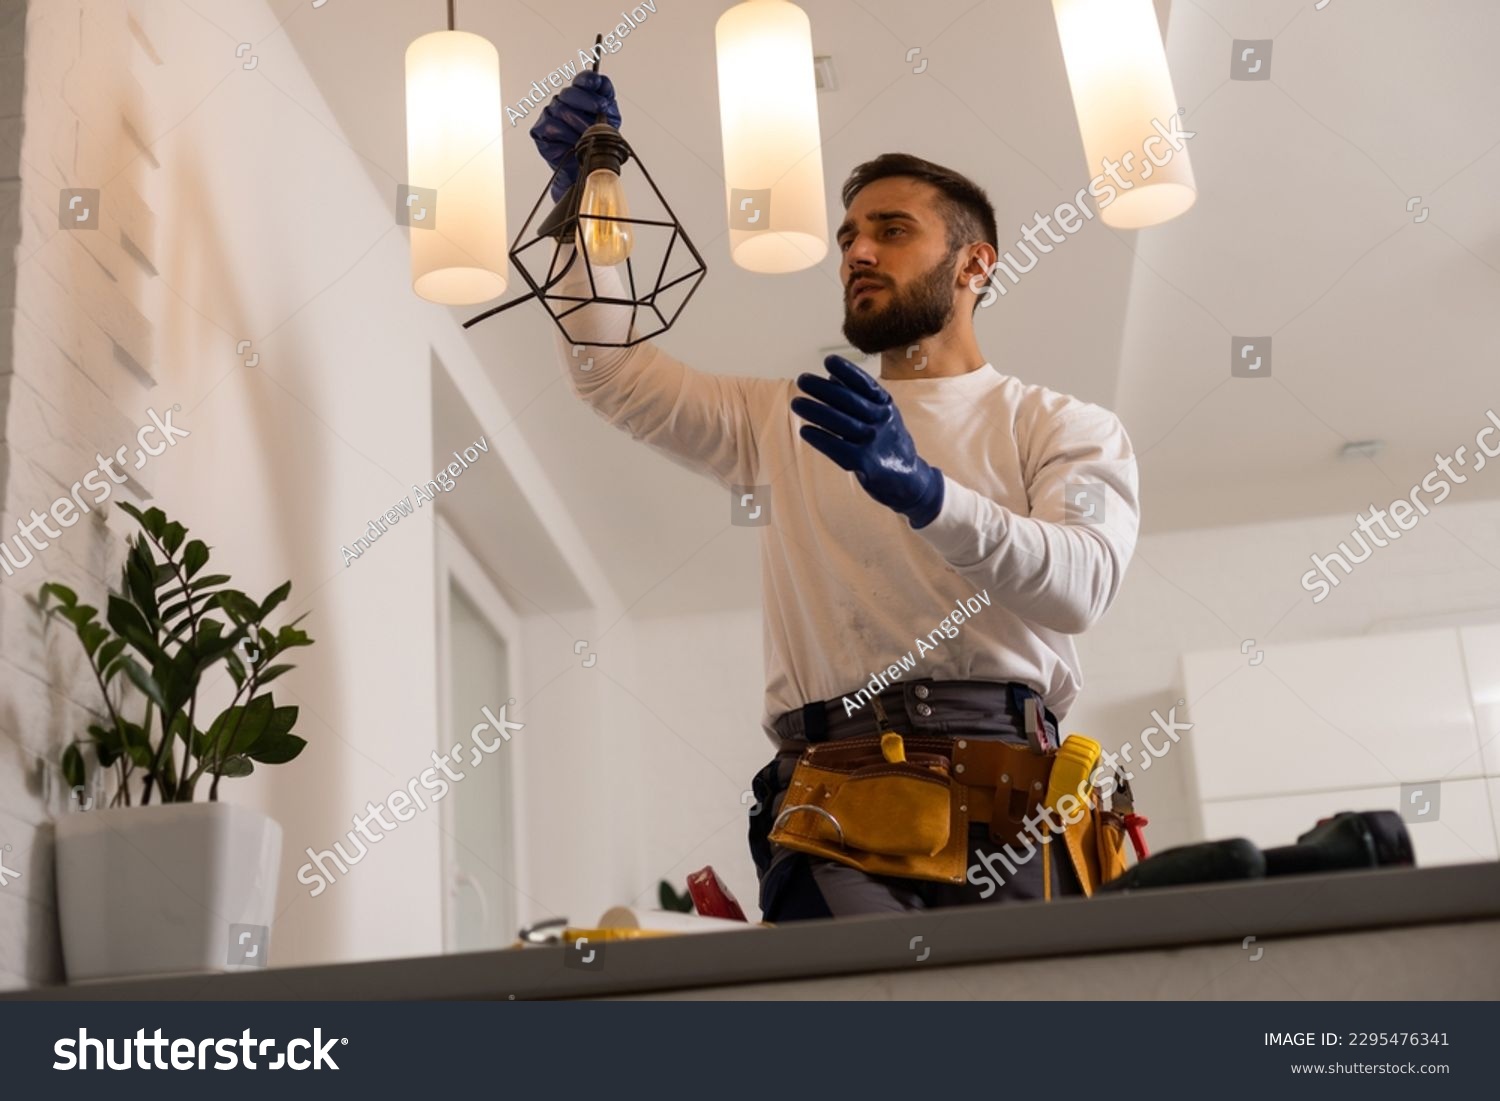 electrician installing led light bulbs in ceiling lamp #2295476341